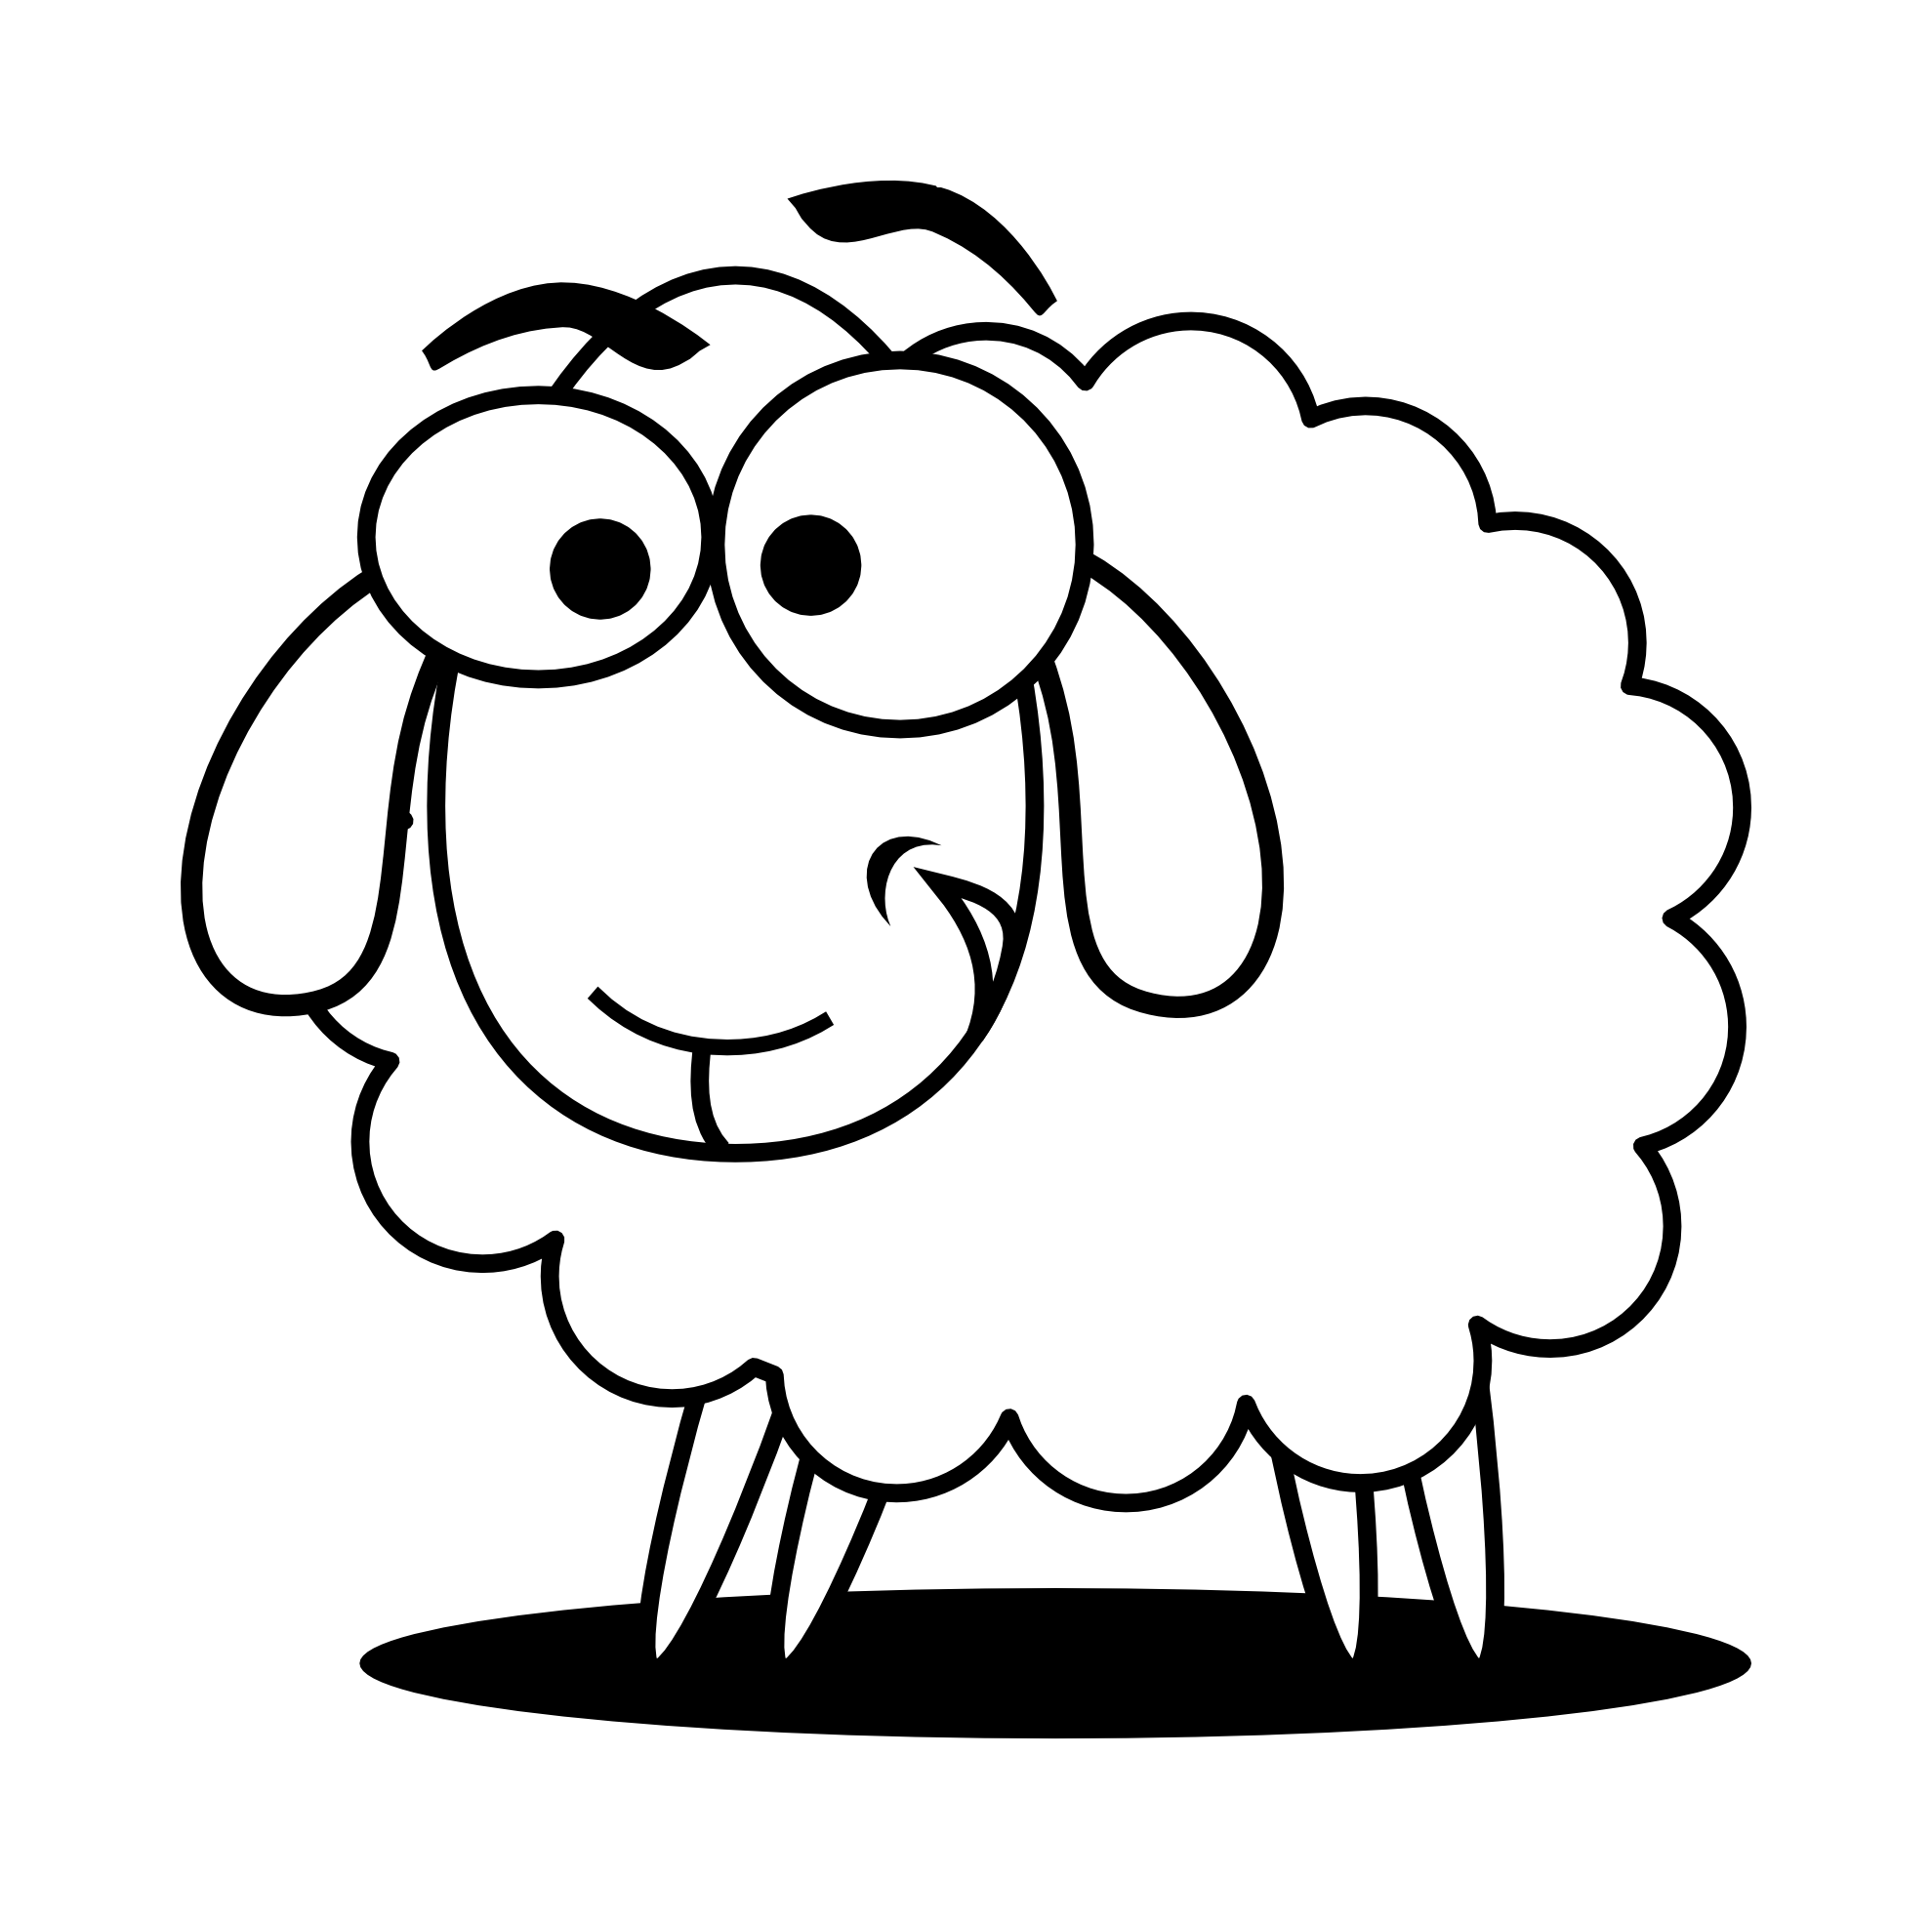 Sheep lamb clipart black and white free clipart images - Clipartix